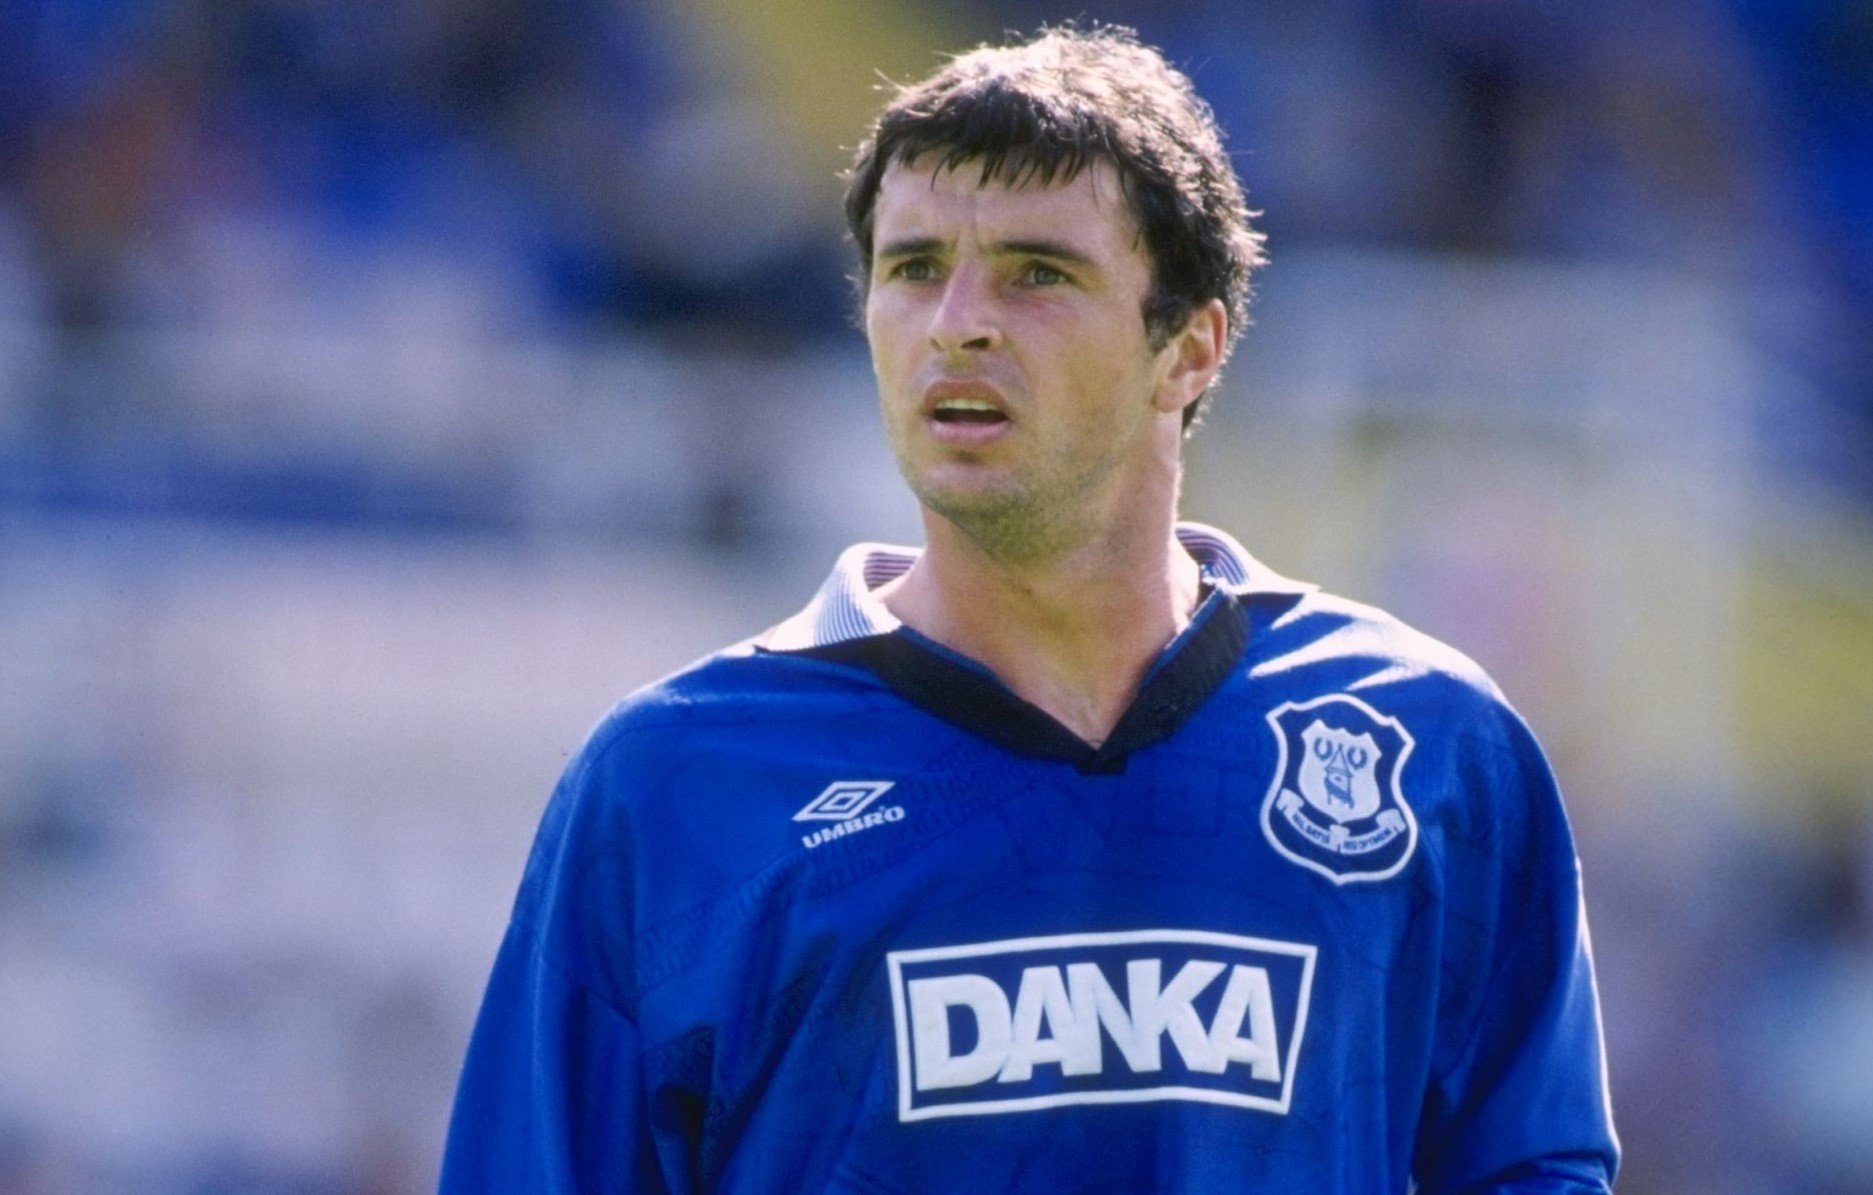 Happy birthday to one of the greatest, Gary Speed. RIP. 